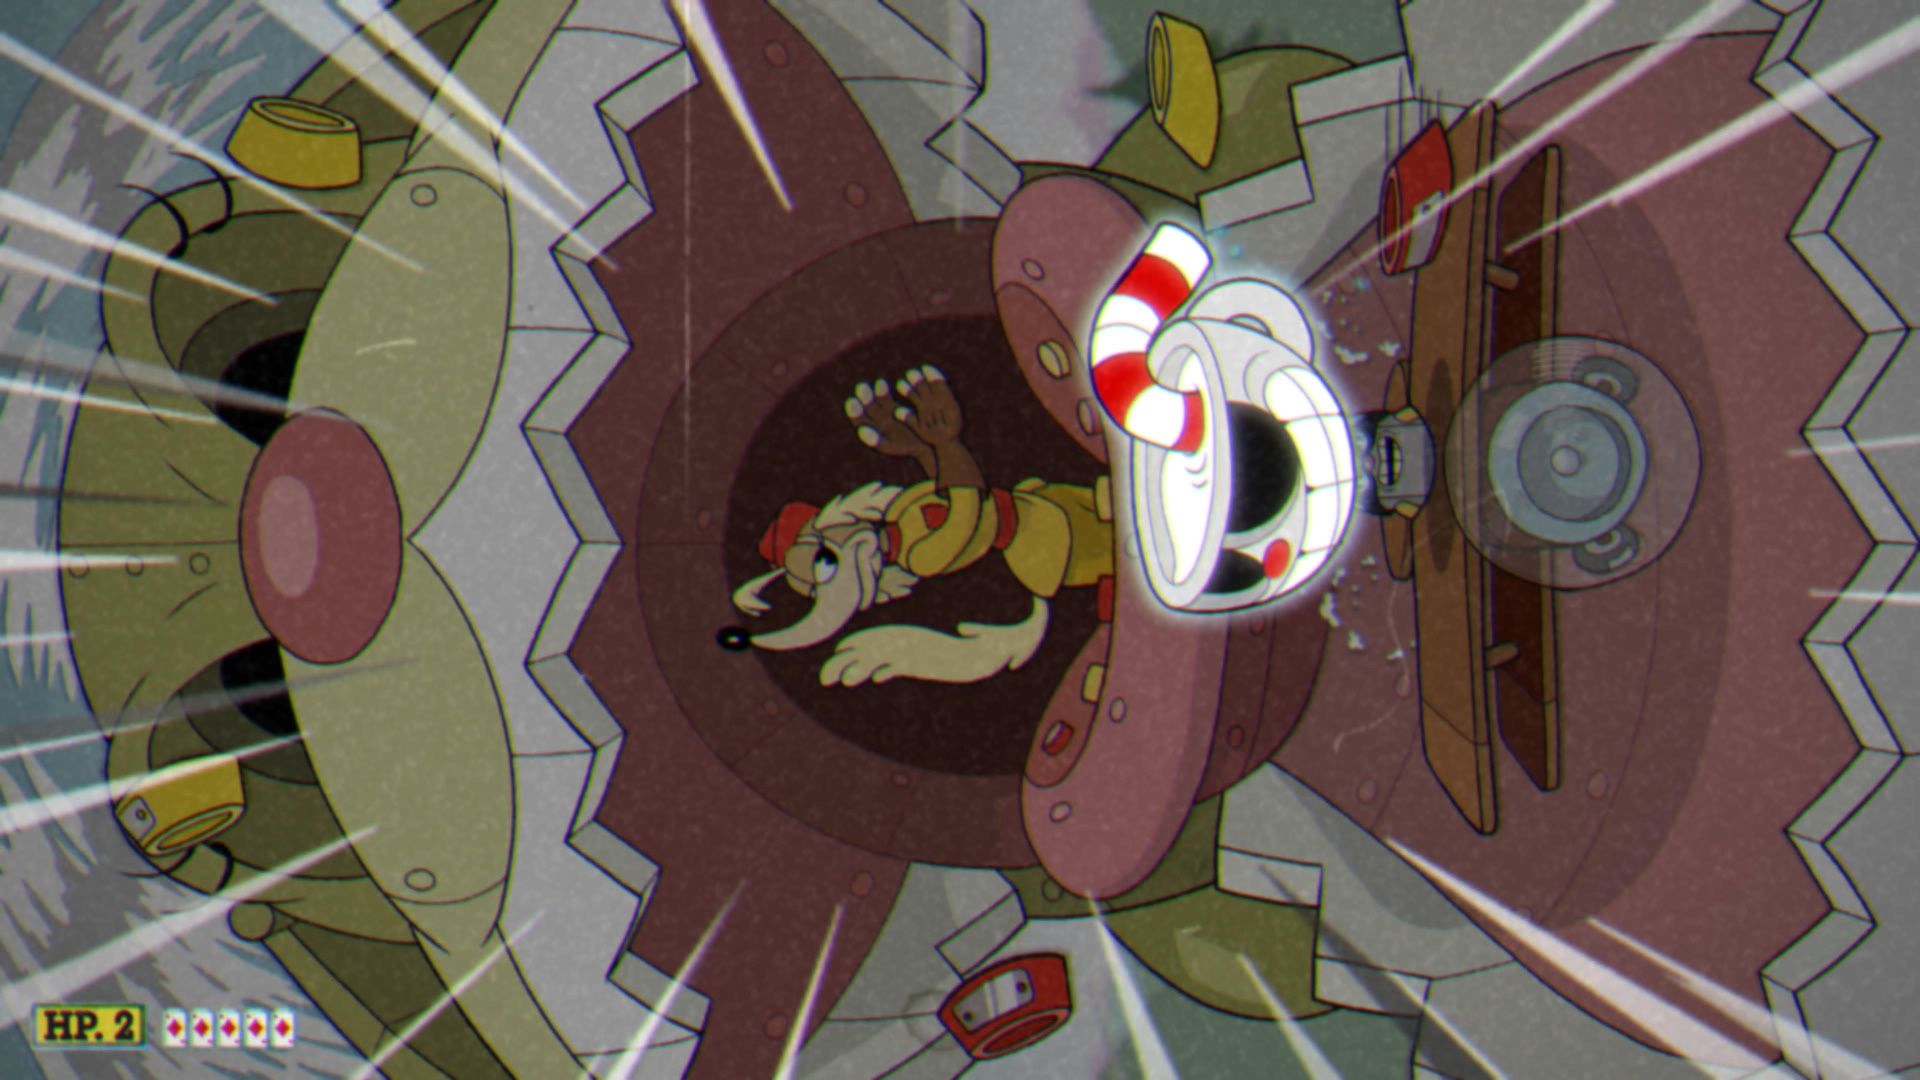 Cuphead The Delicious Course, The Howling Aces, Phase 3, Turning invincible